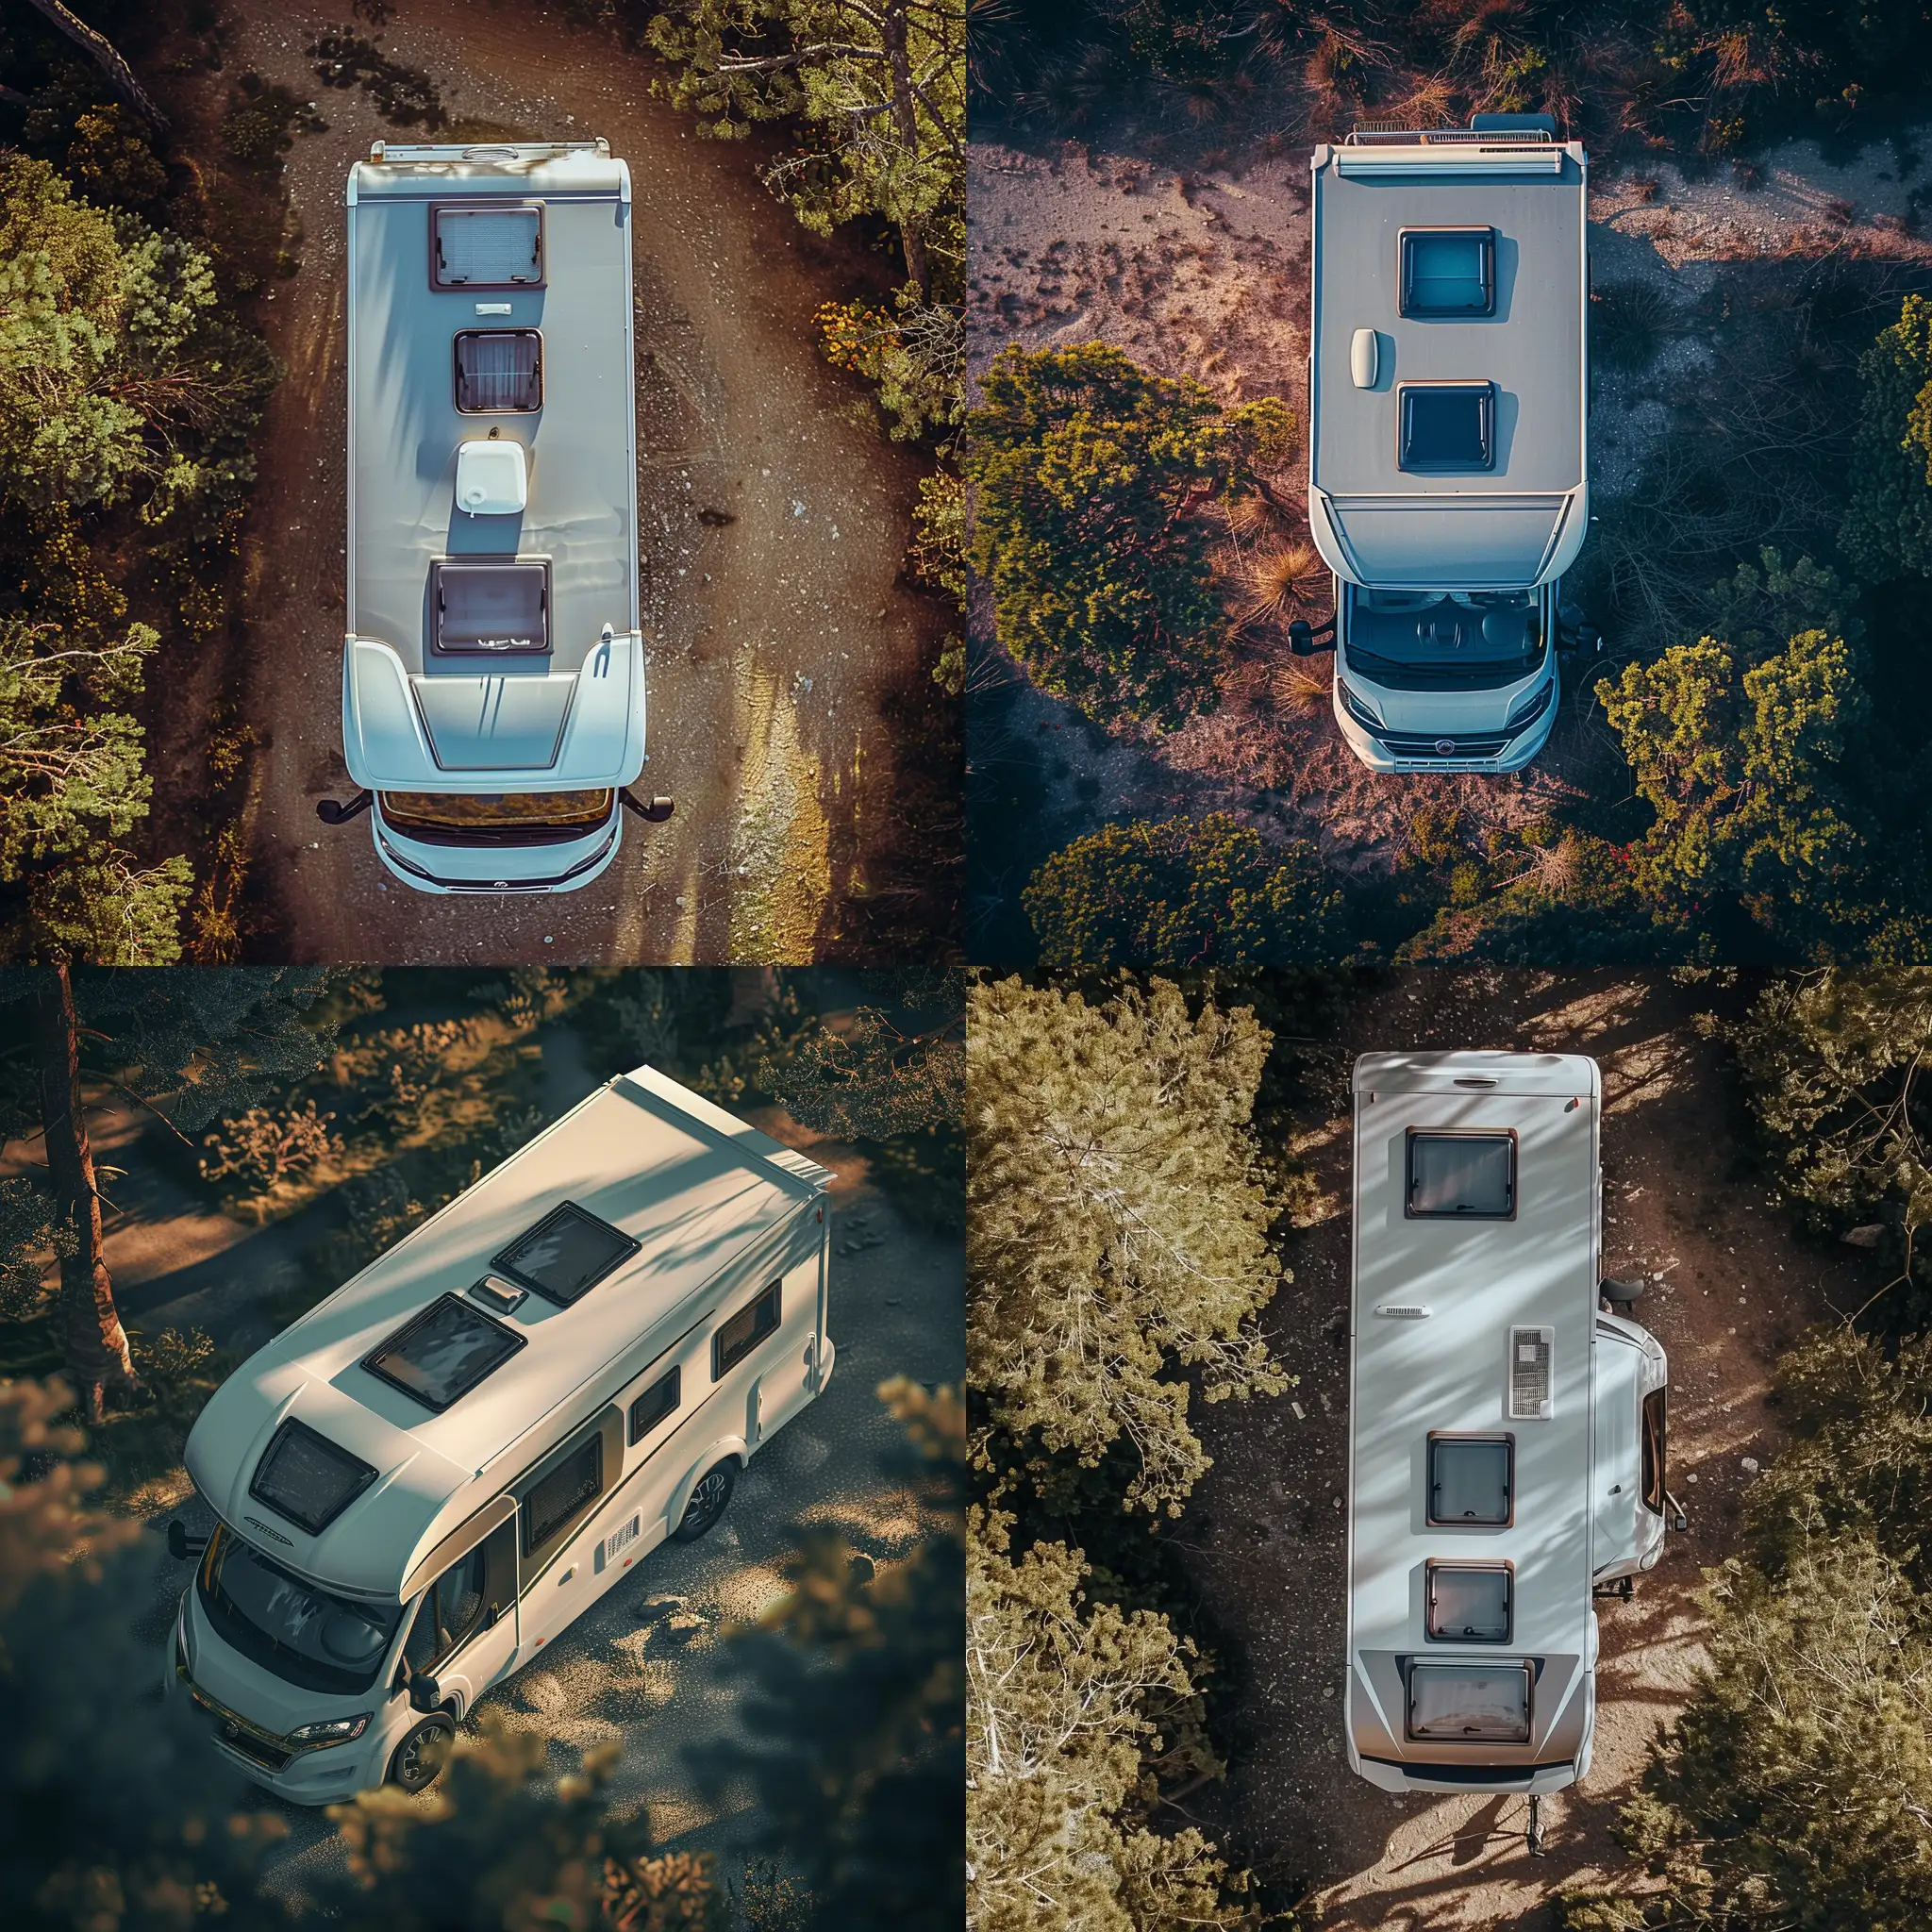 TopDown-View-of-Motorhome-Parked-in-Scenic-Clearing